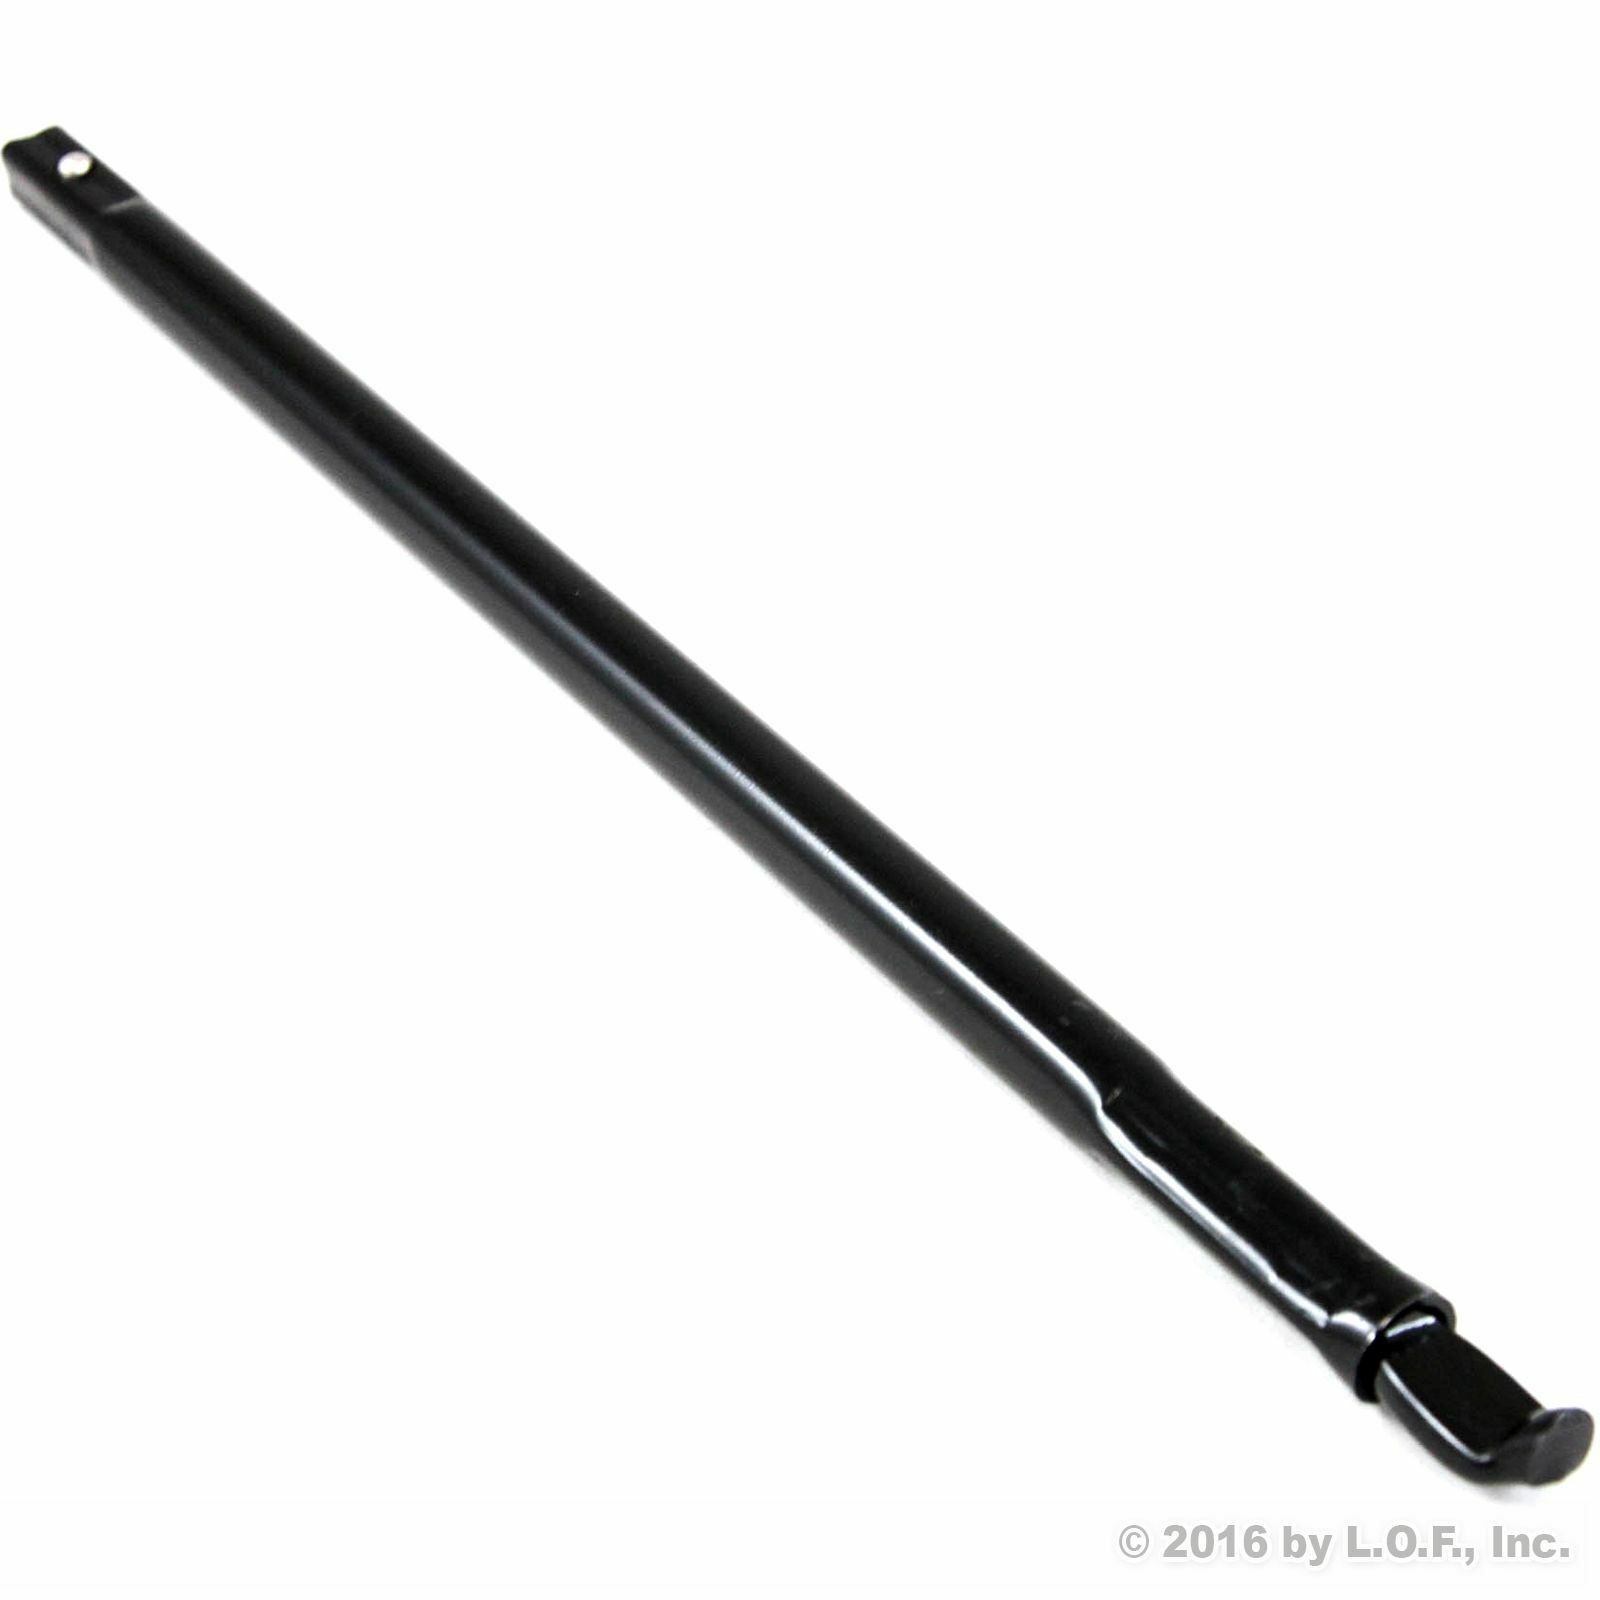 98-11 Ford Ranger Spare Jack Extension Tire Tool Replacement for Jack